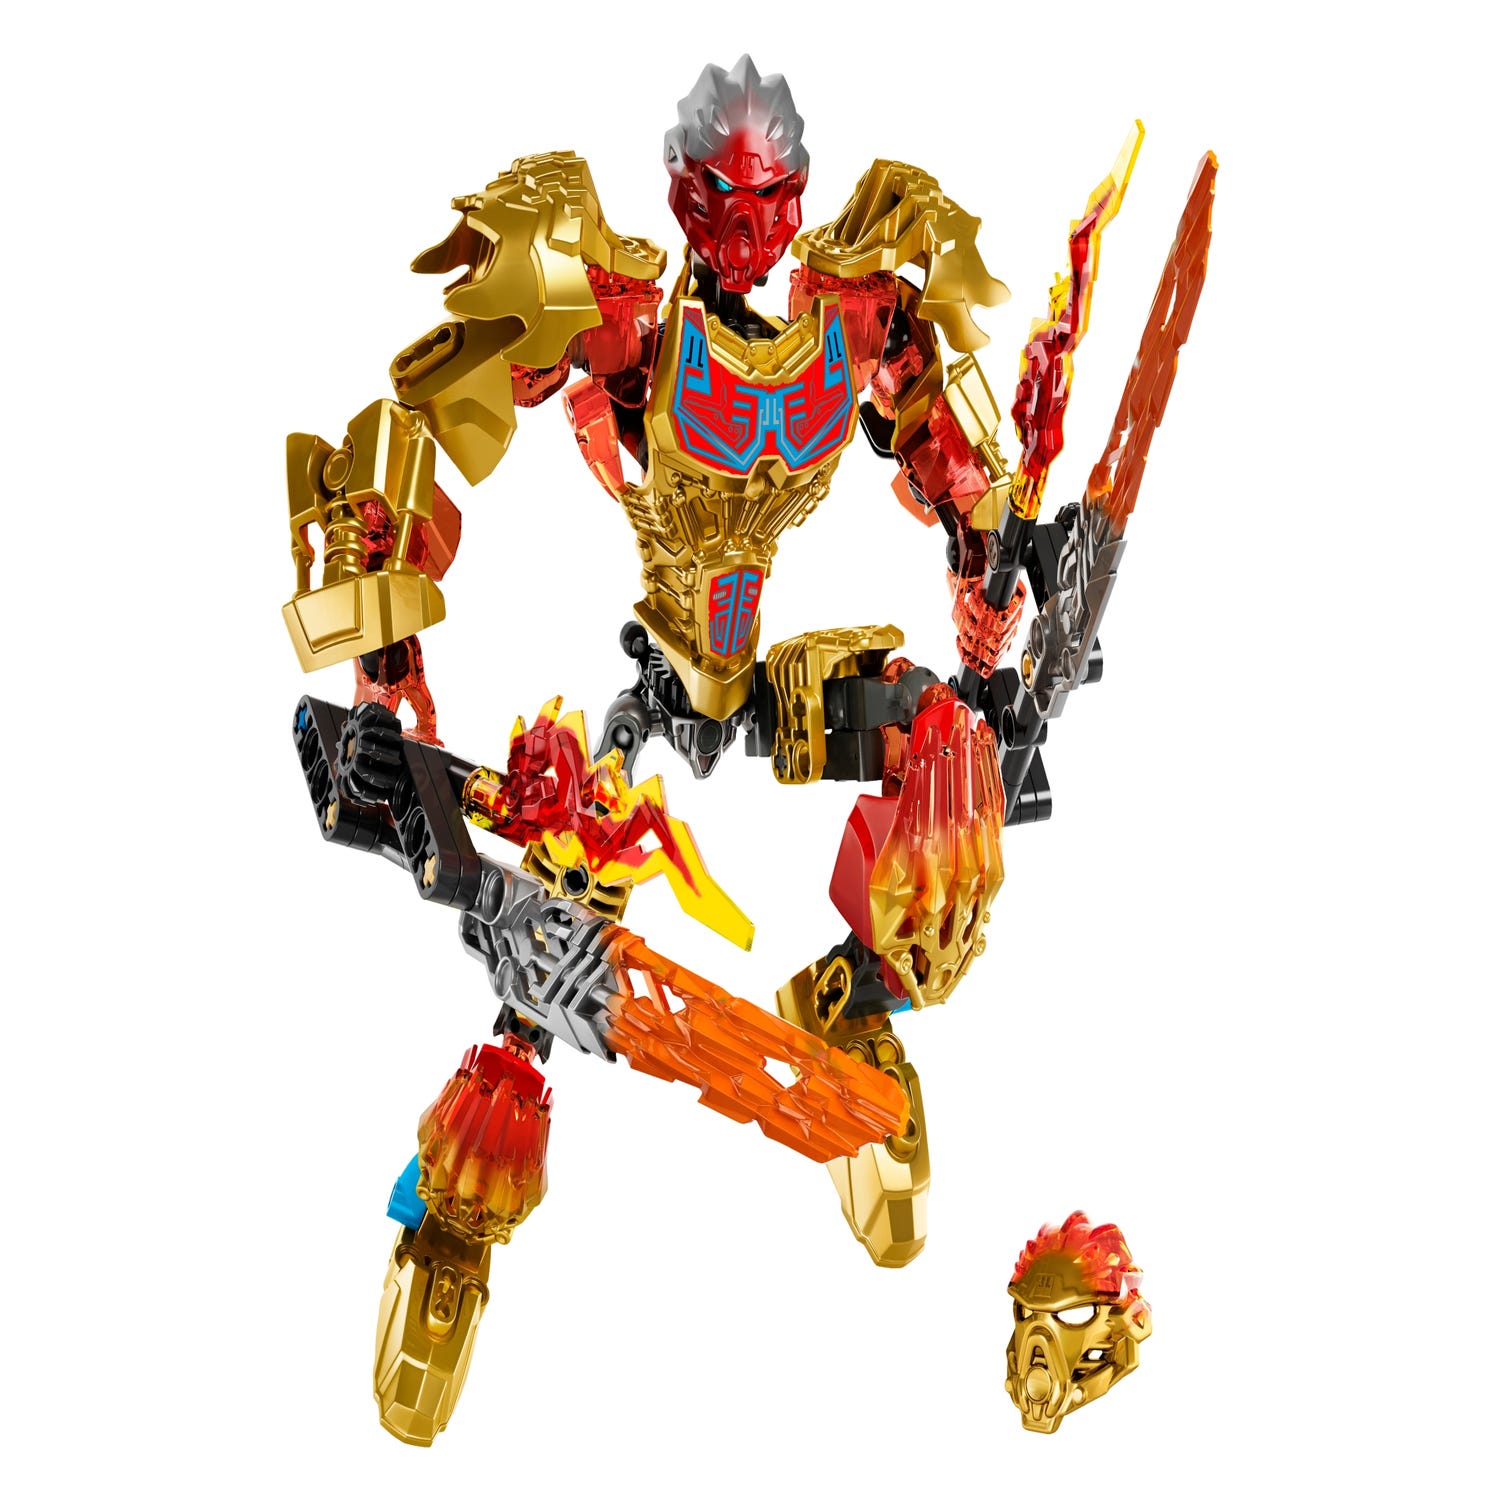 Tahu Uniter of Fire 71308 | BIONICLE® Buy online at the Official LEGO® Shop US